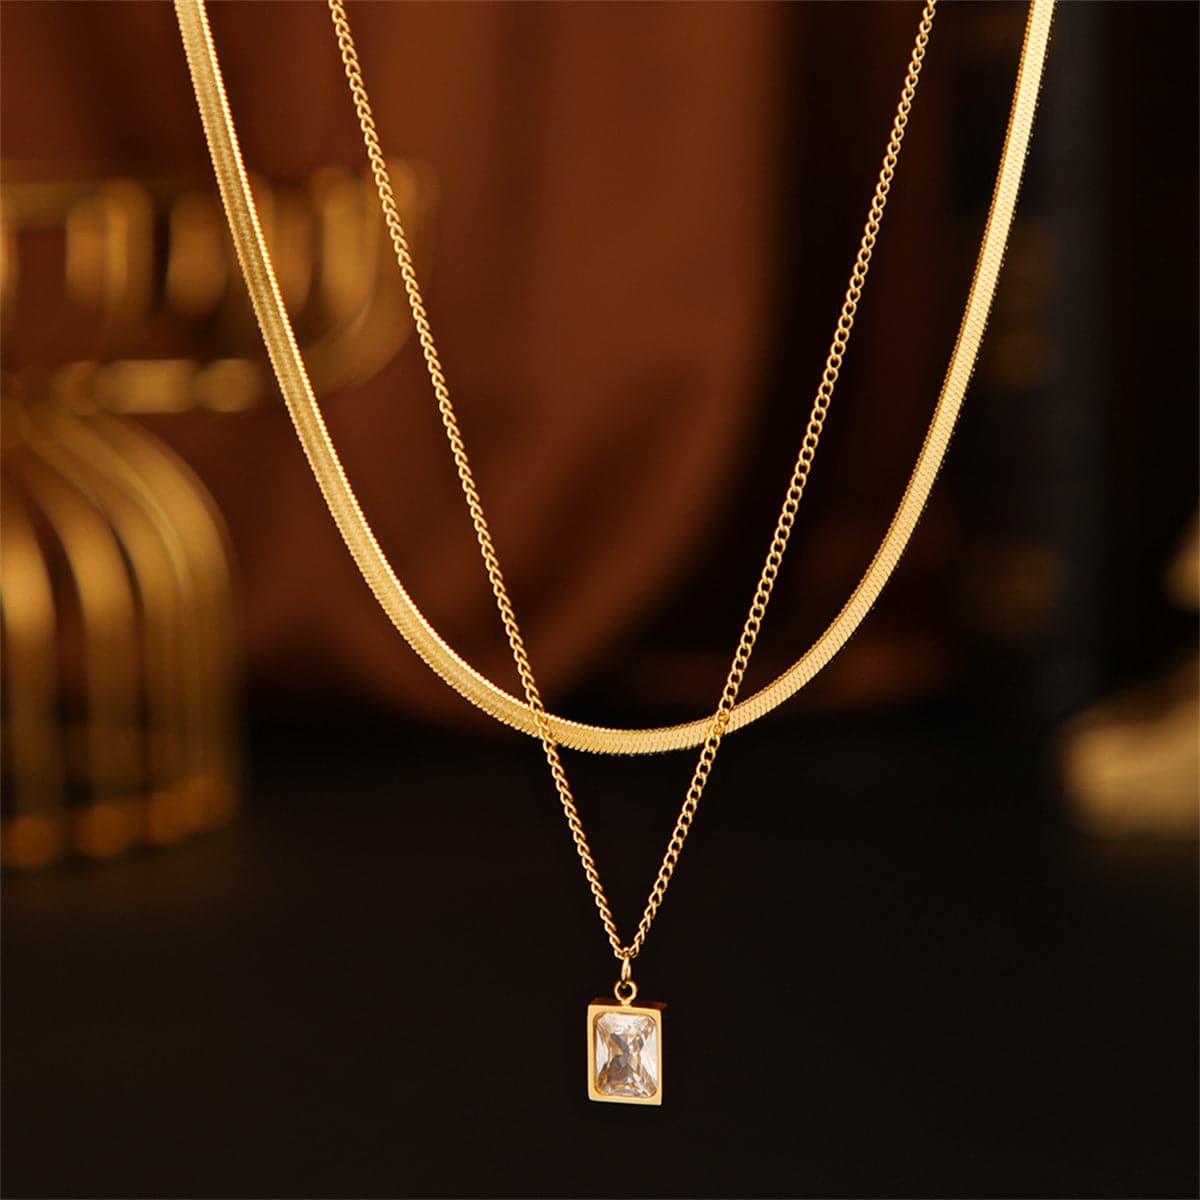 Clear Crystal & 18K Gold-Plated Snake Chain Layered Pendant Necklace